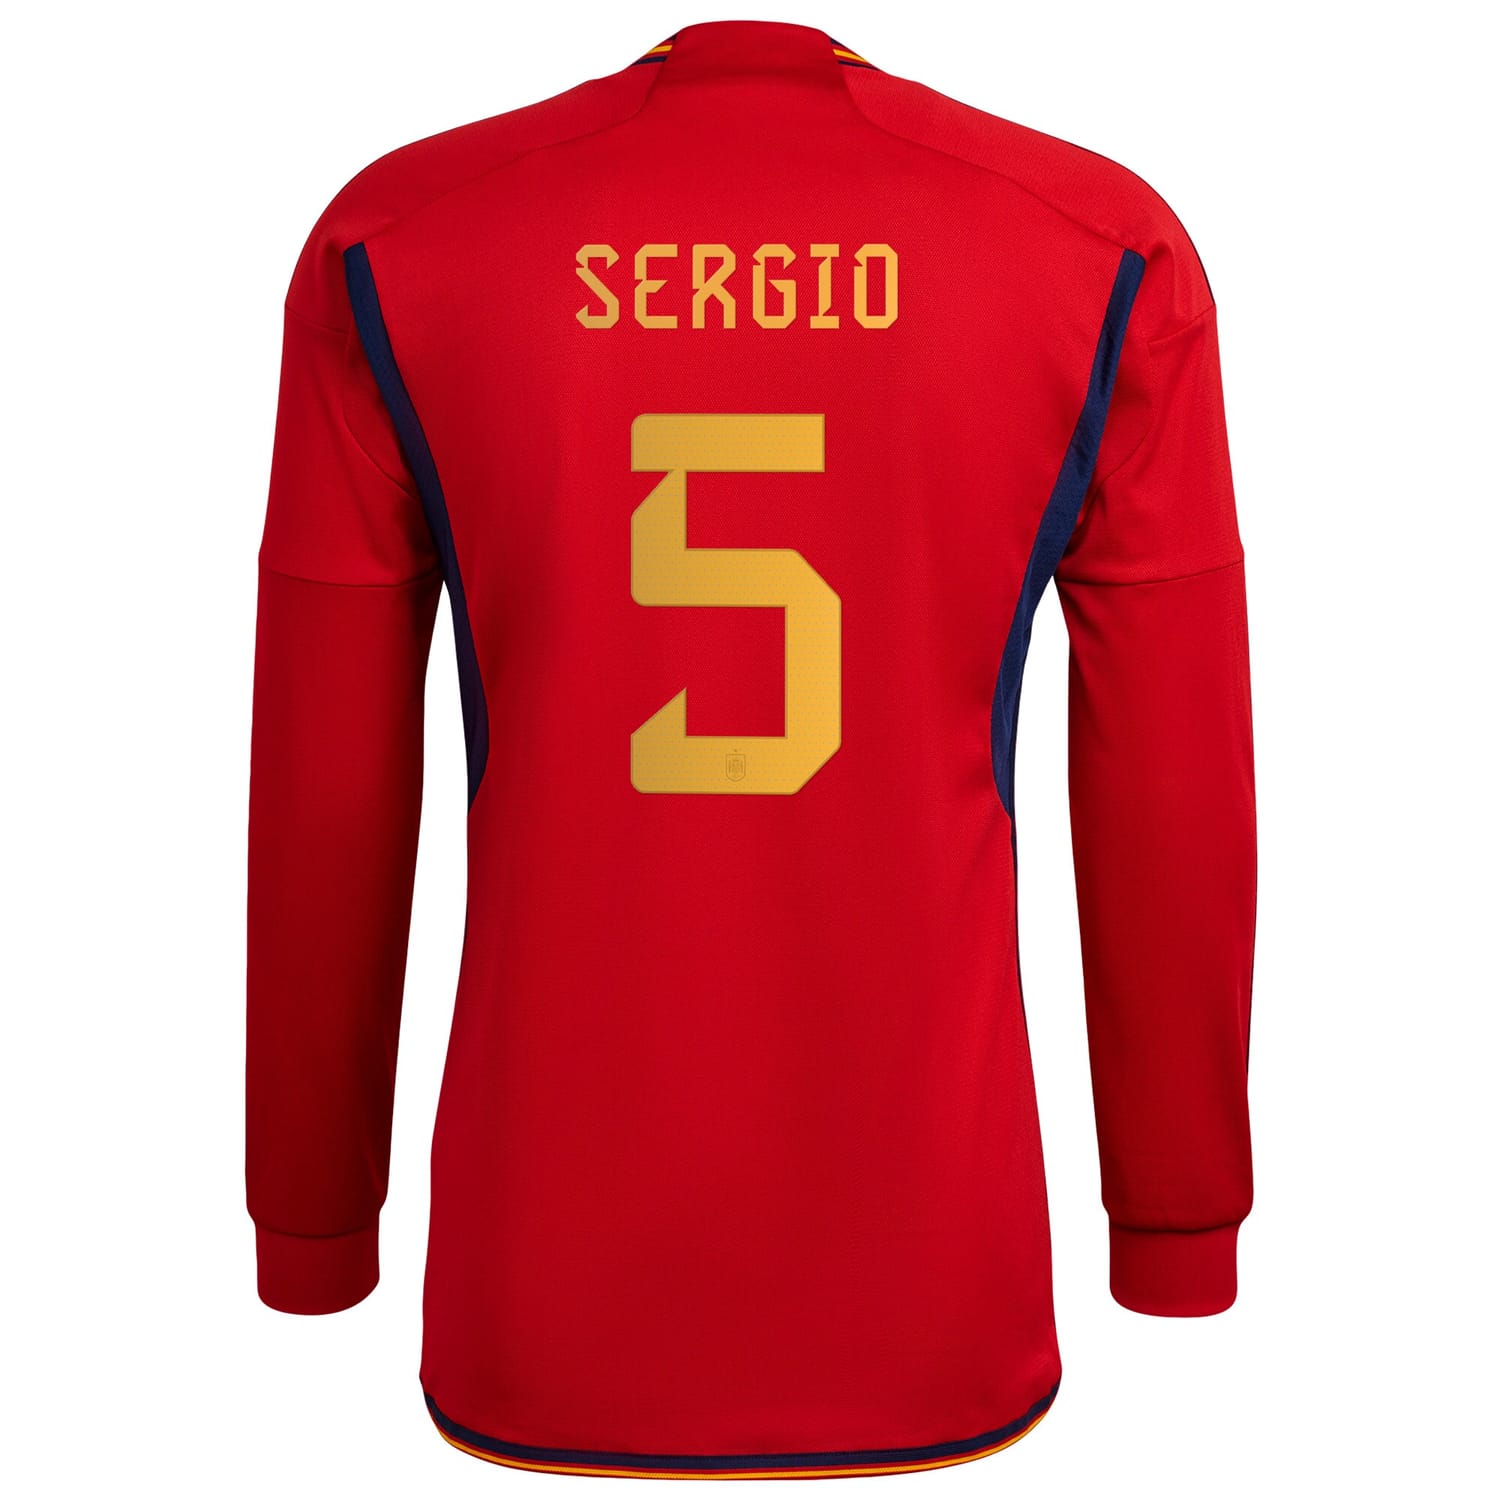 Spain National Team Home Jersey Shirt Long Sleeve Red 2022-23 player Sergio Busquets printing for Men